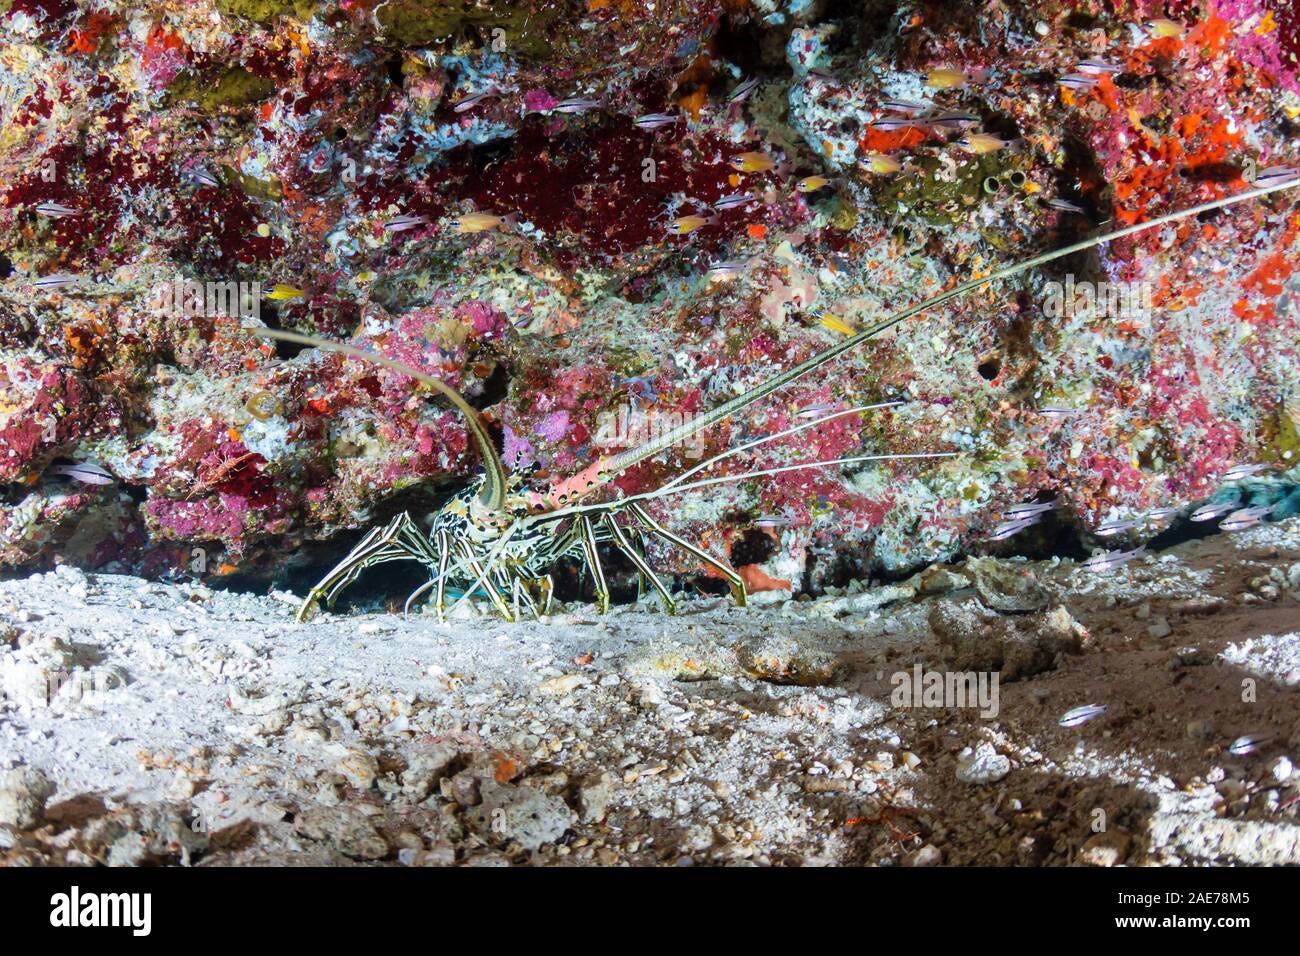 Large Spiny Lobster on a coral reef Stock Photo